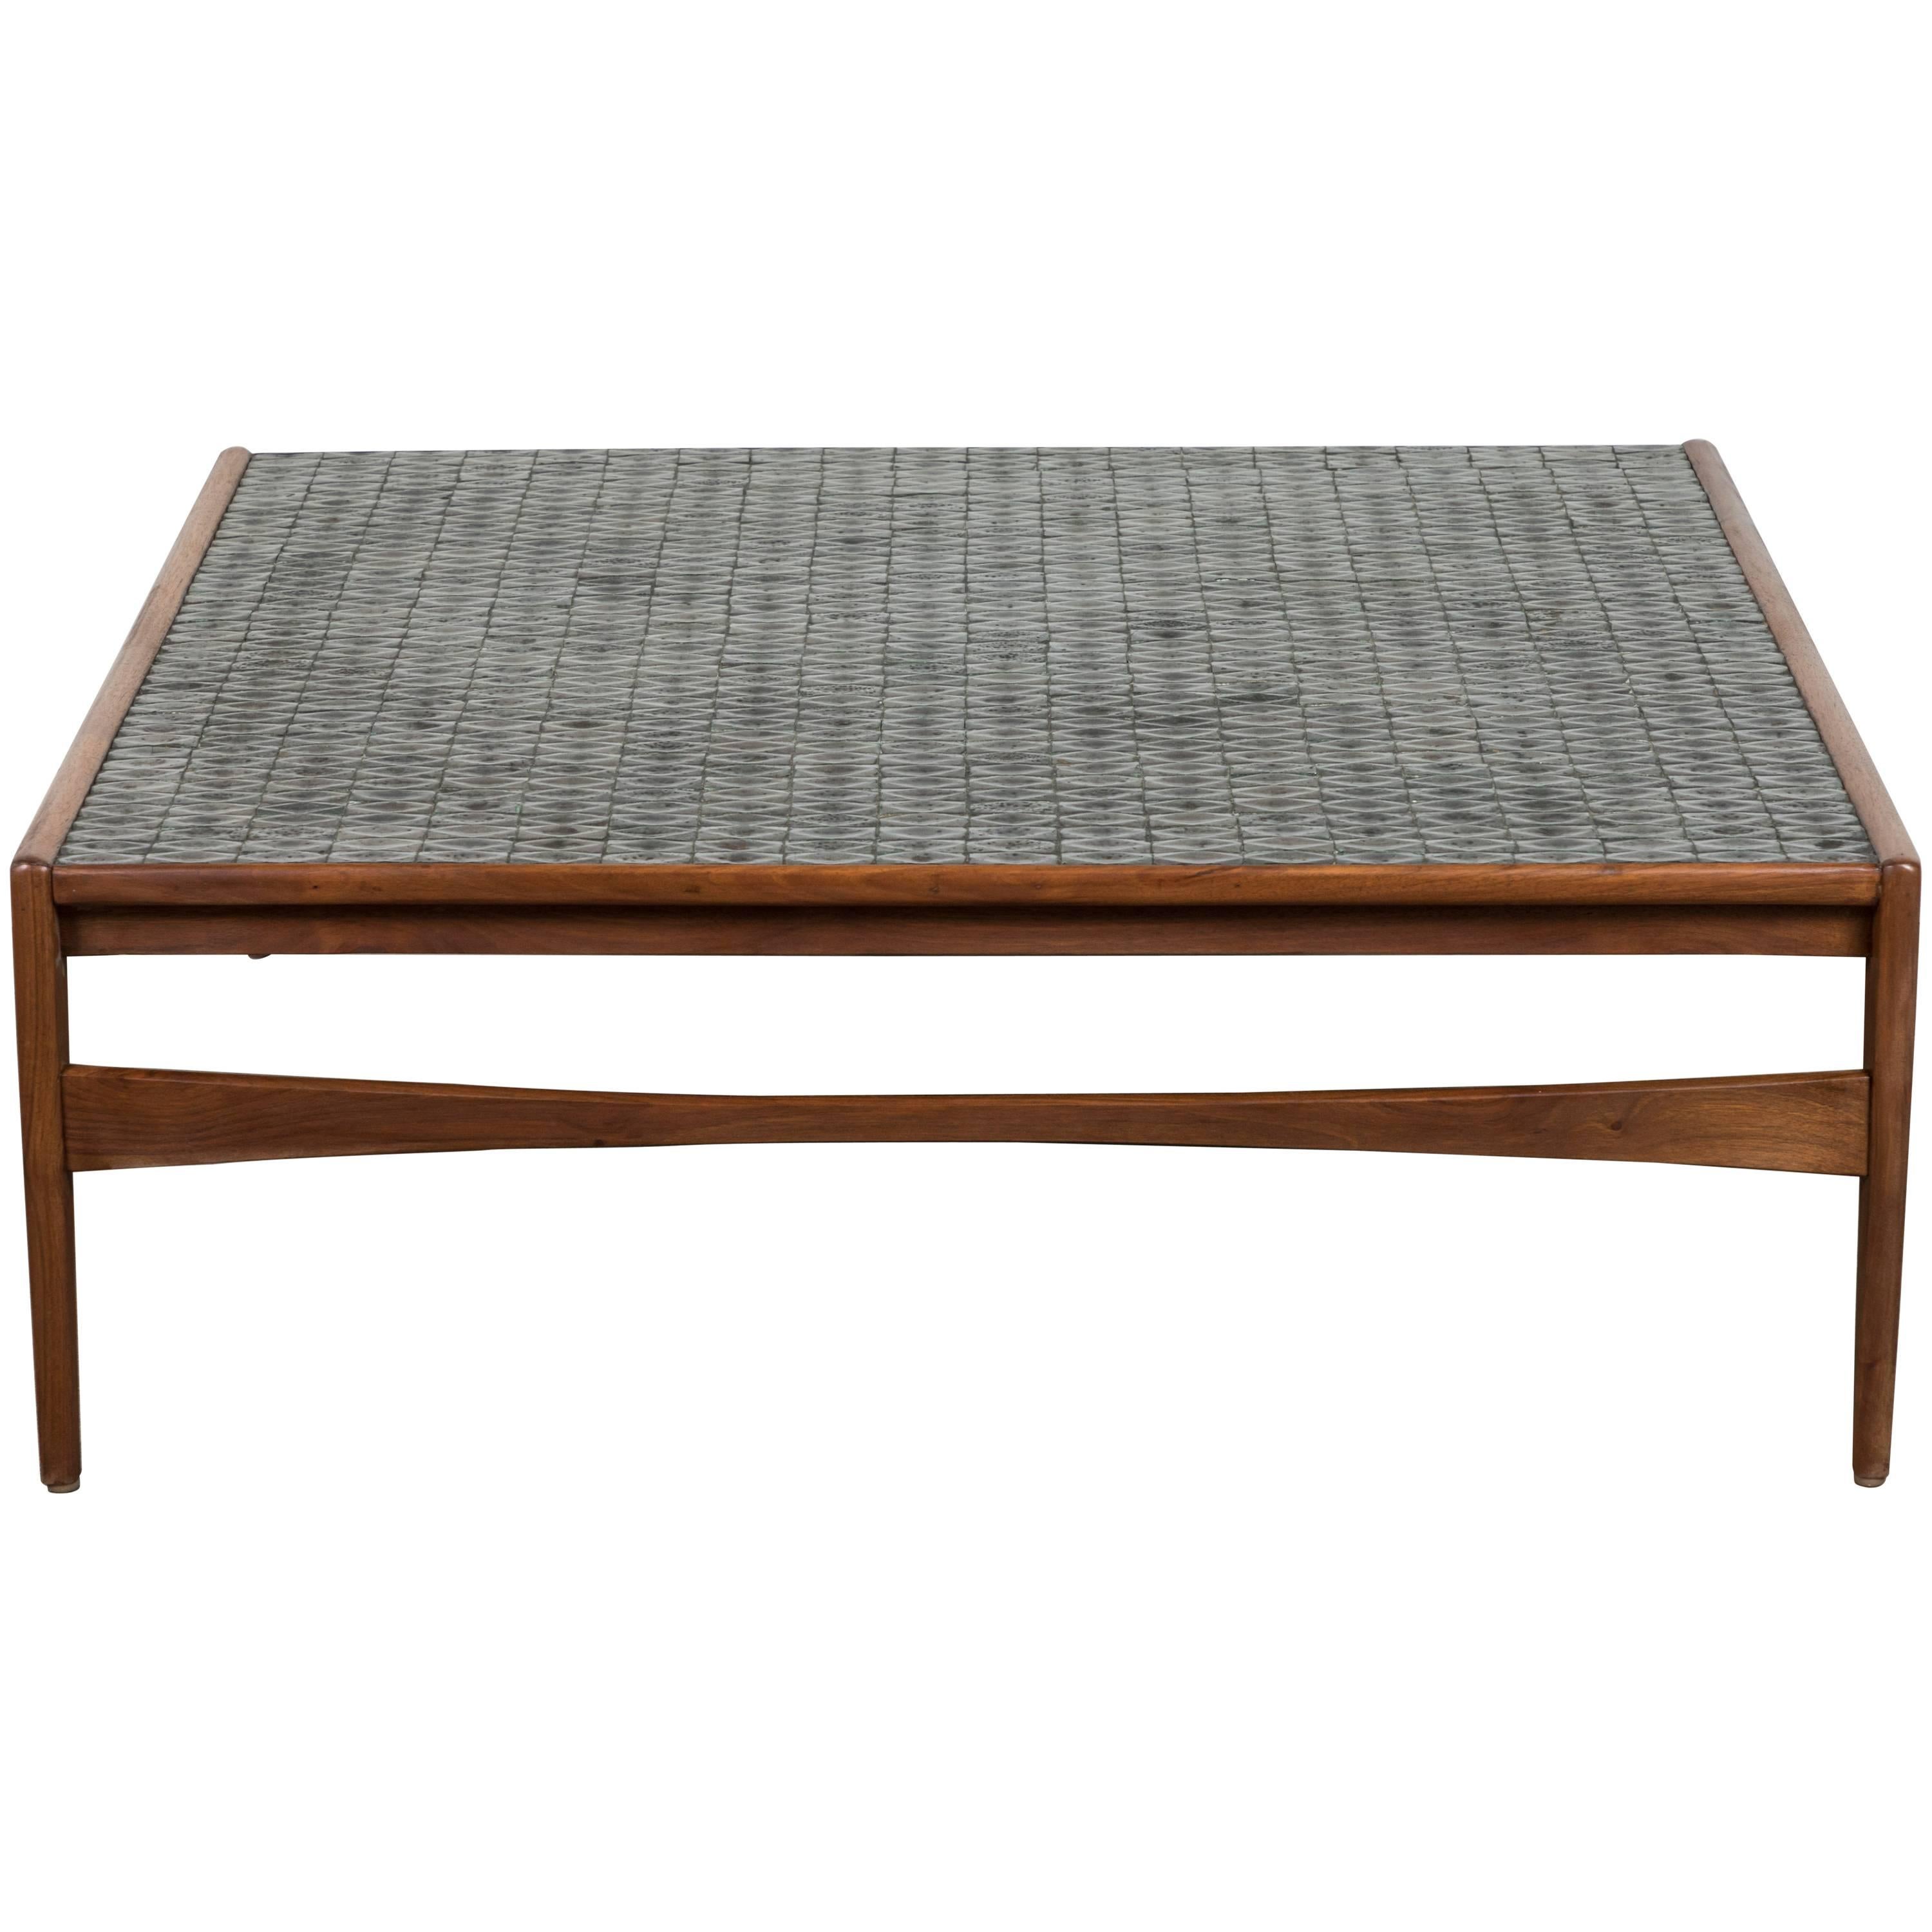 Spanish Walnut and Oxidized Tile Coffee Table